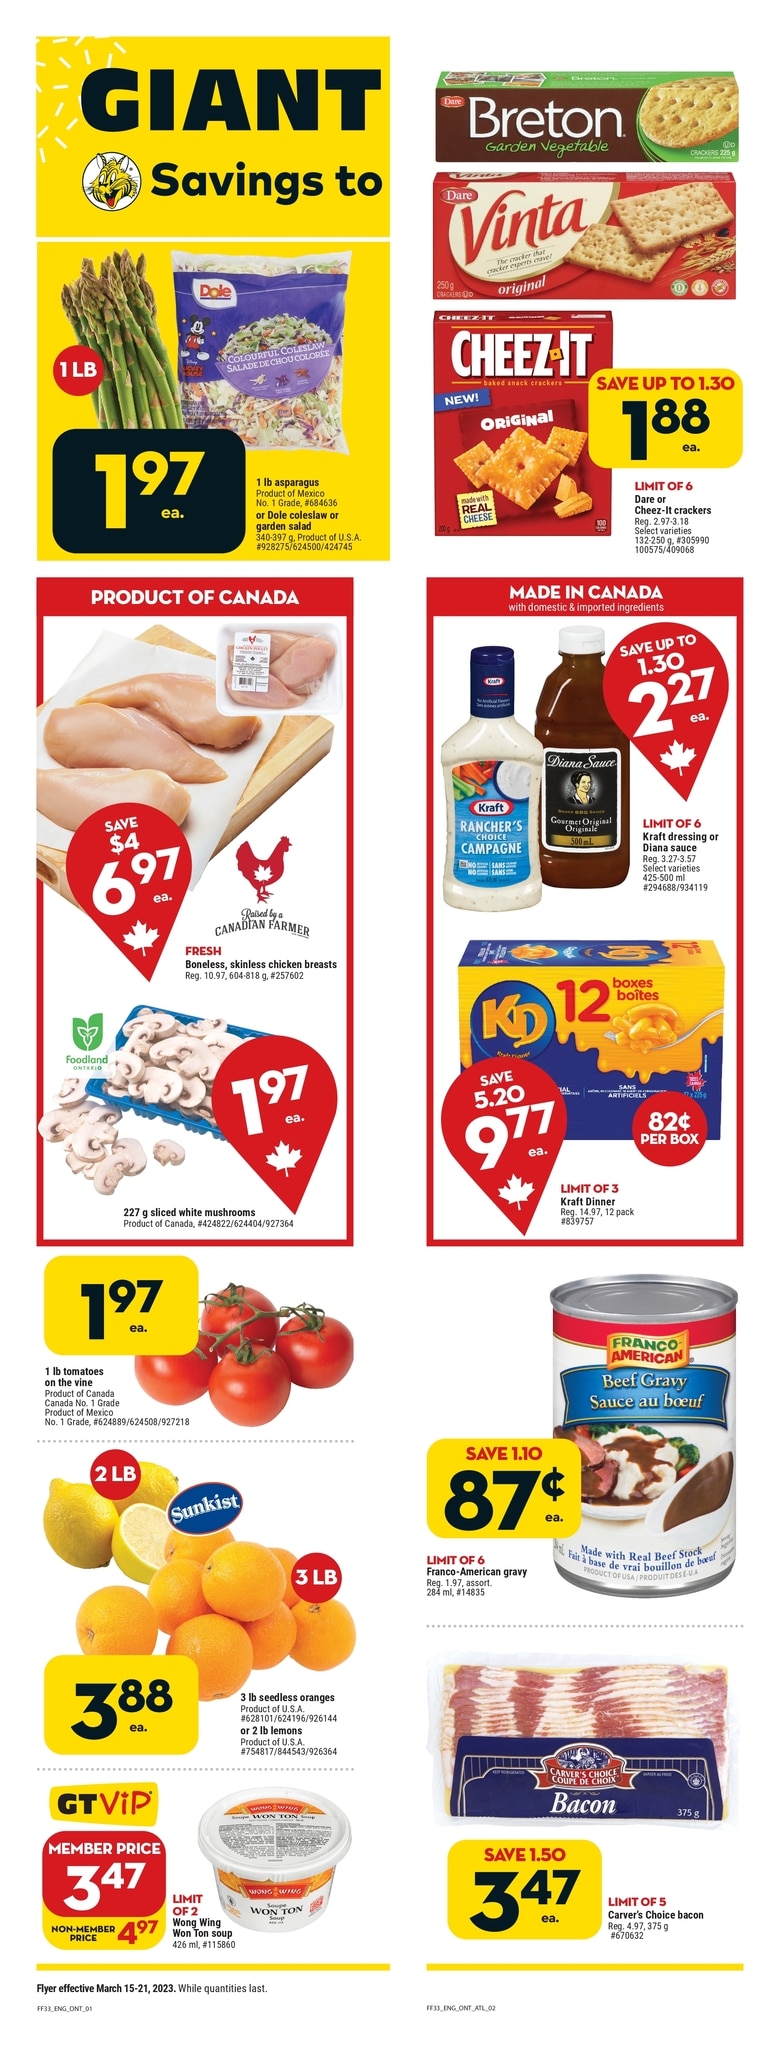 Giant Tiger - Weekly Flyer Specials - Page 2